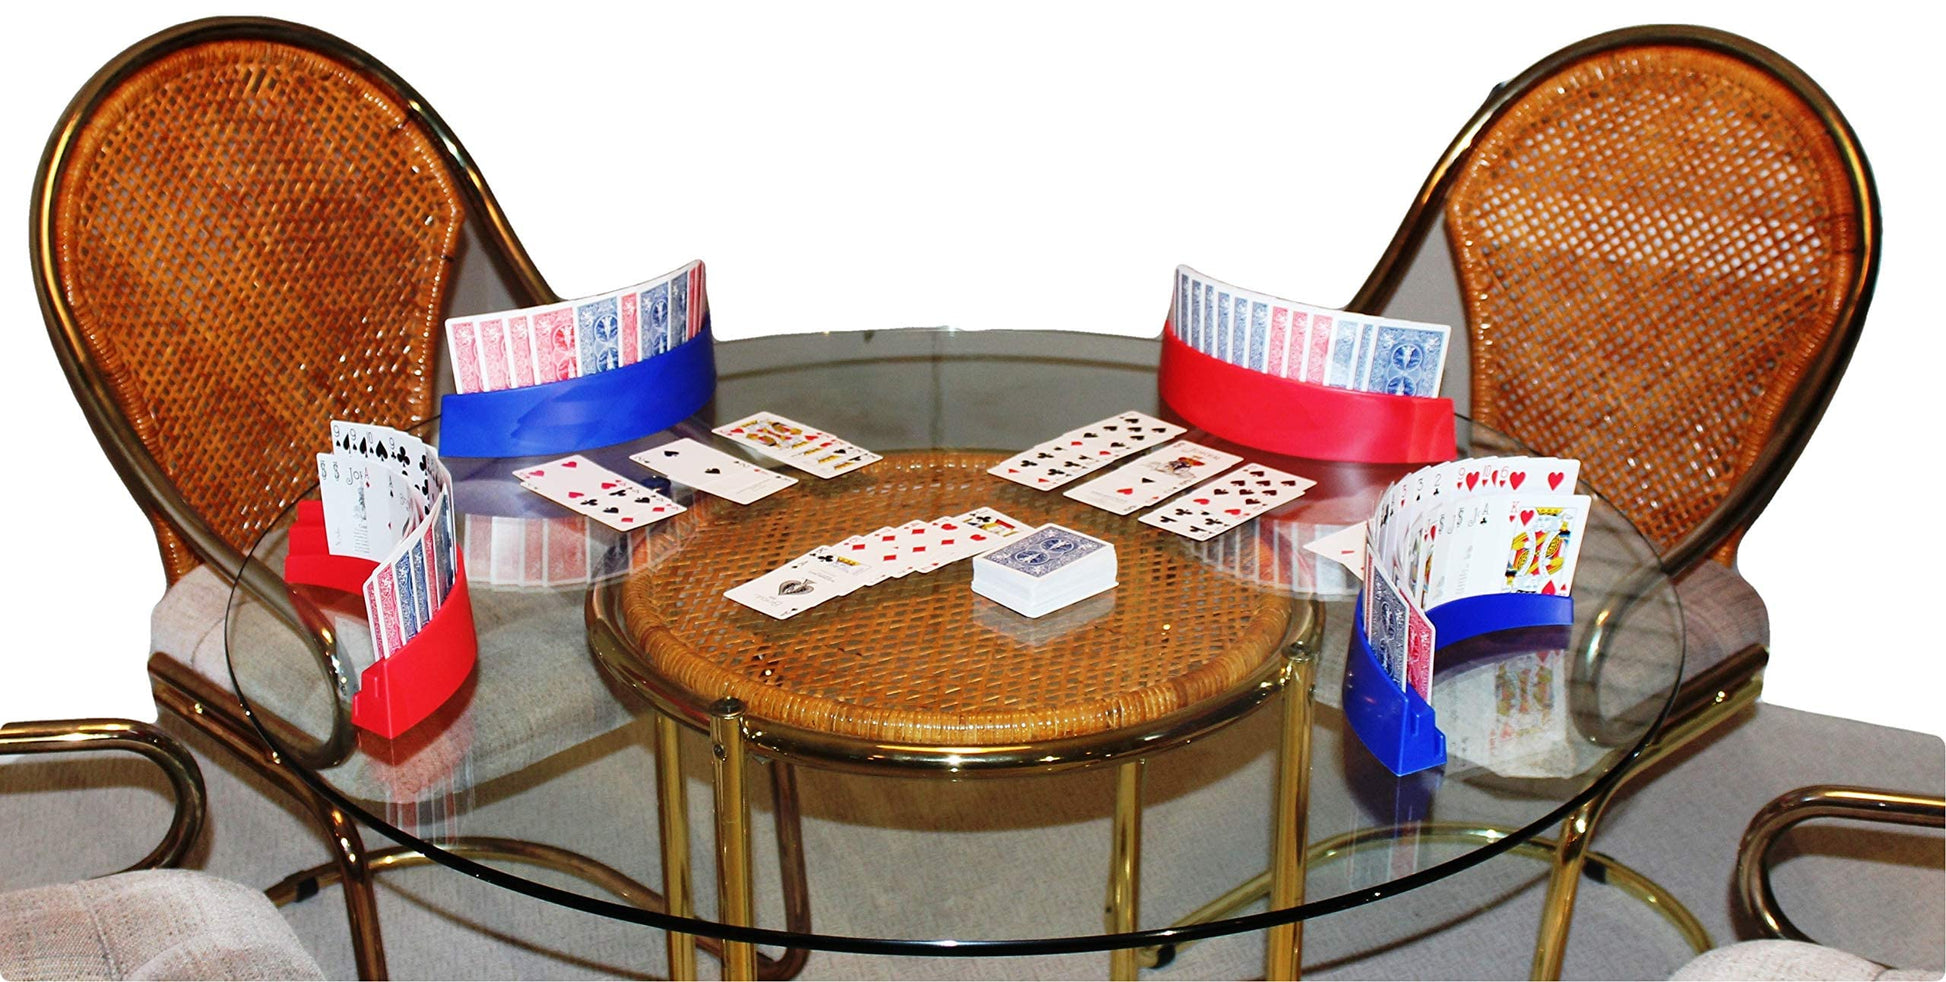 Twin Tier Premier Playing Card Holder (Set of 2) - Holds Up to 32 Playing Cards Easily - 12 1/2" x 4 1/2" x 2 1/4" - Stack for Storage - Made in The USA (Blue) - Opticdeals